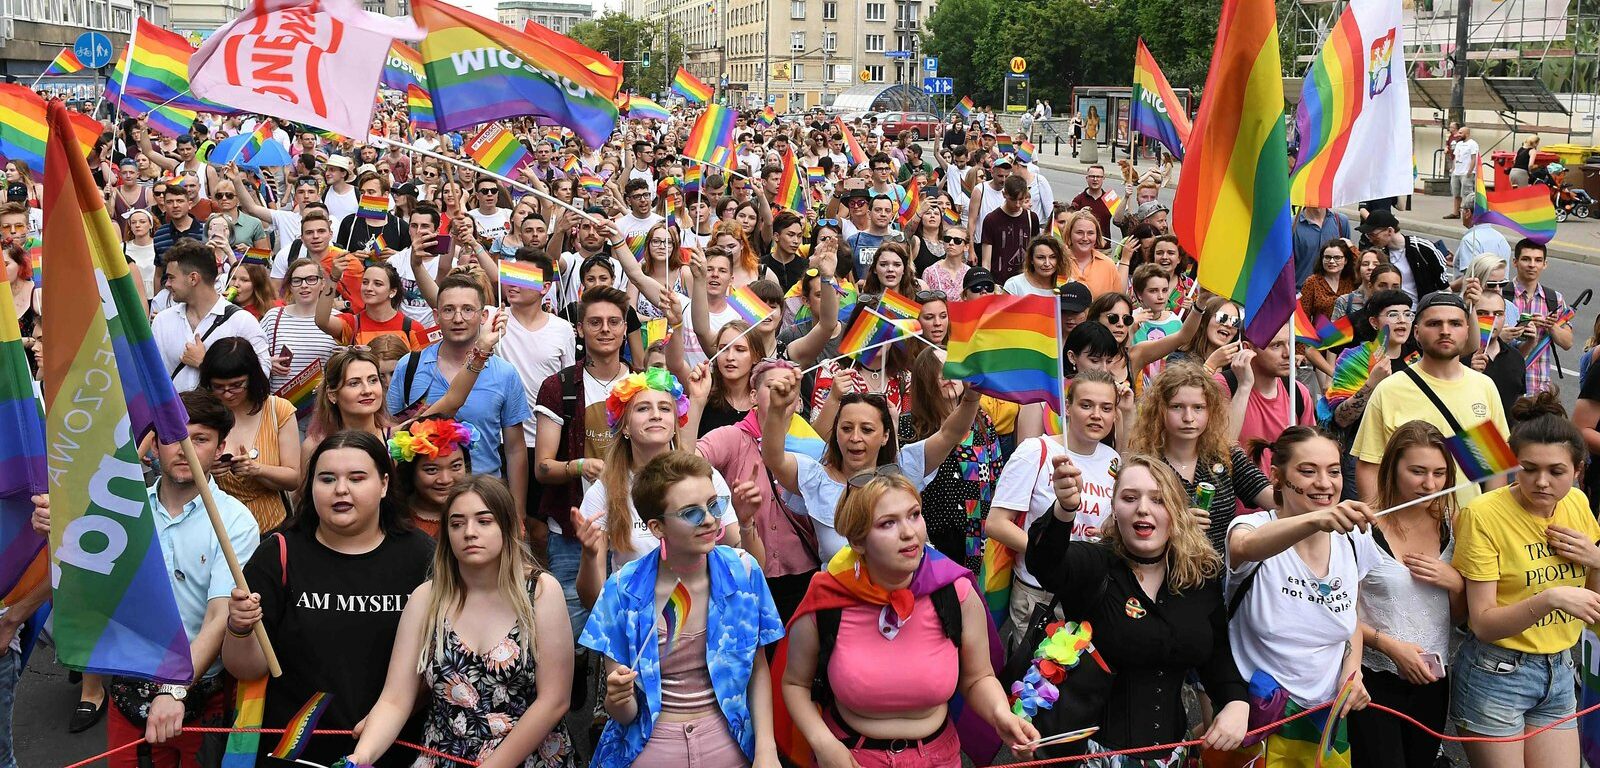 Crowds filled the streets of Warsaw at Saturday’s pride parade.Credit...